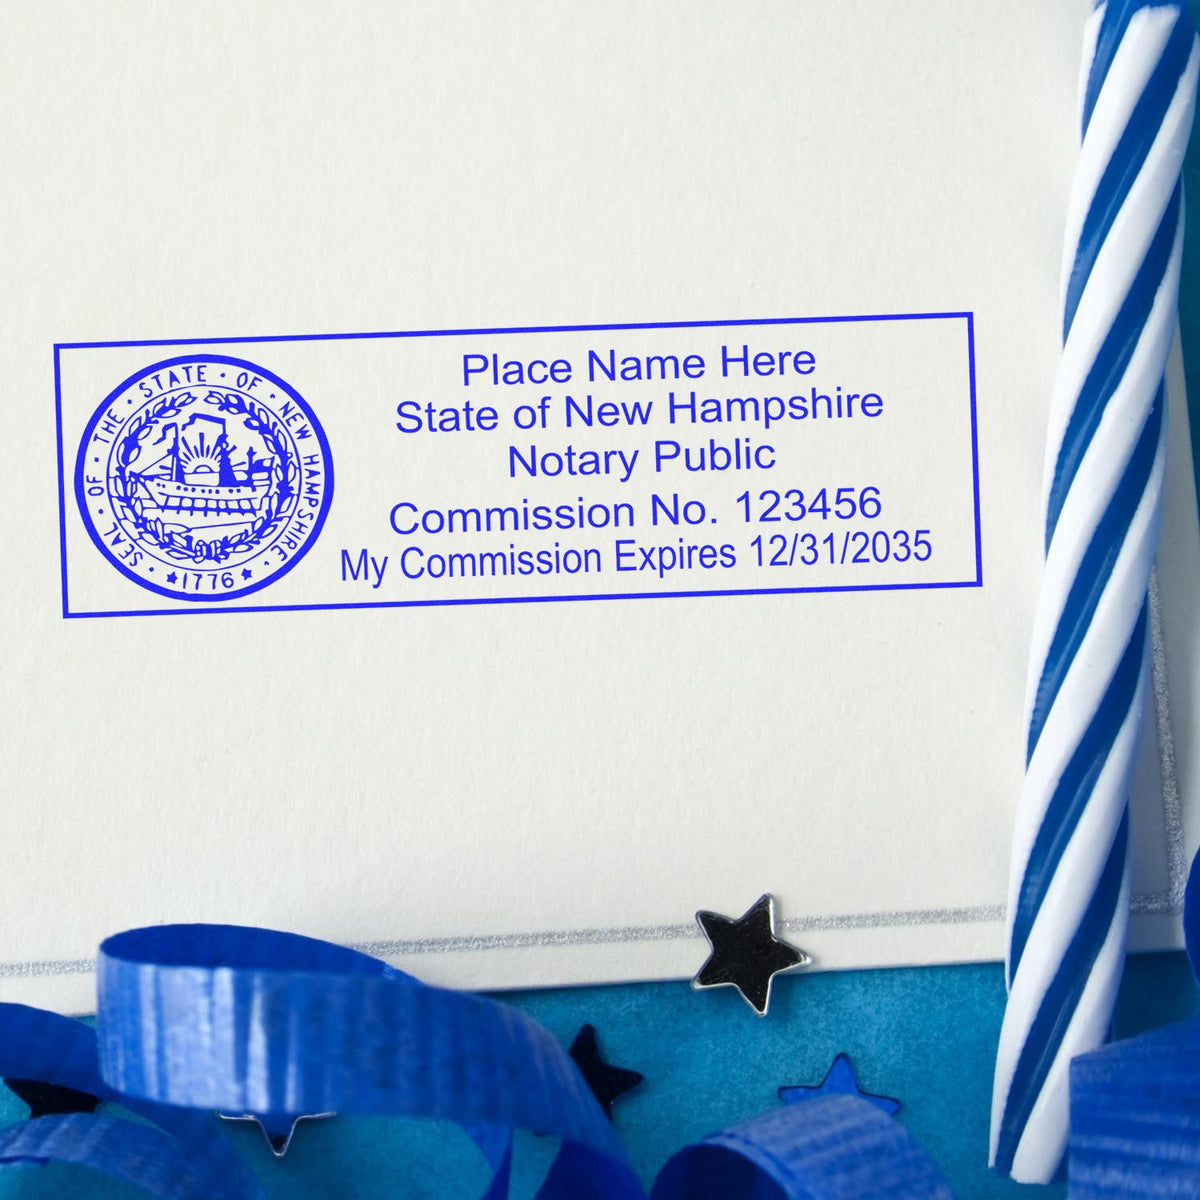 A stamped impression of the Super Slim New Hampshire Notary Public Stamp in this stylish lifestyle photo, setting the tone for a unique and personalized product.